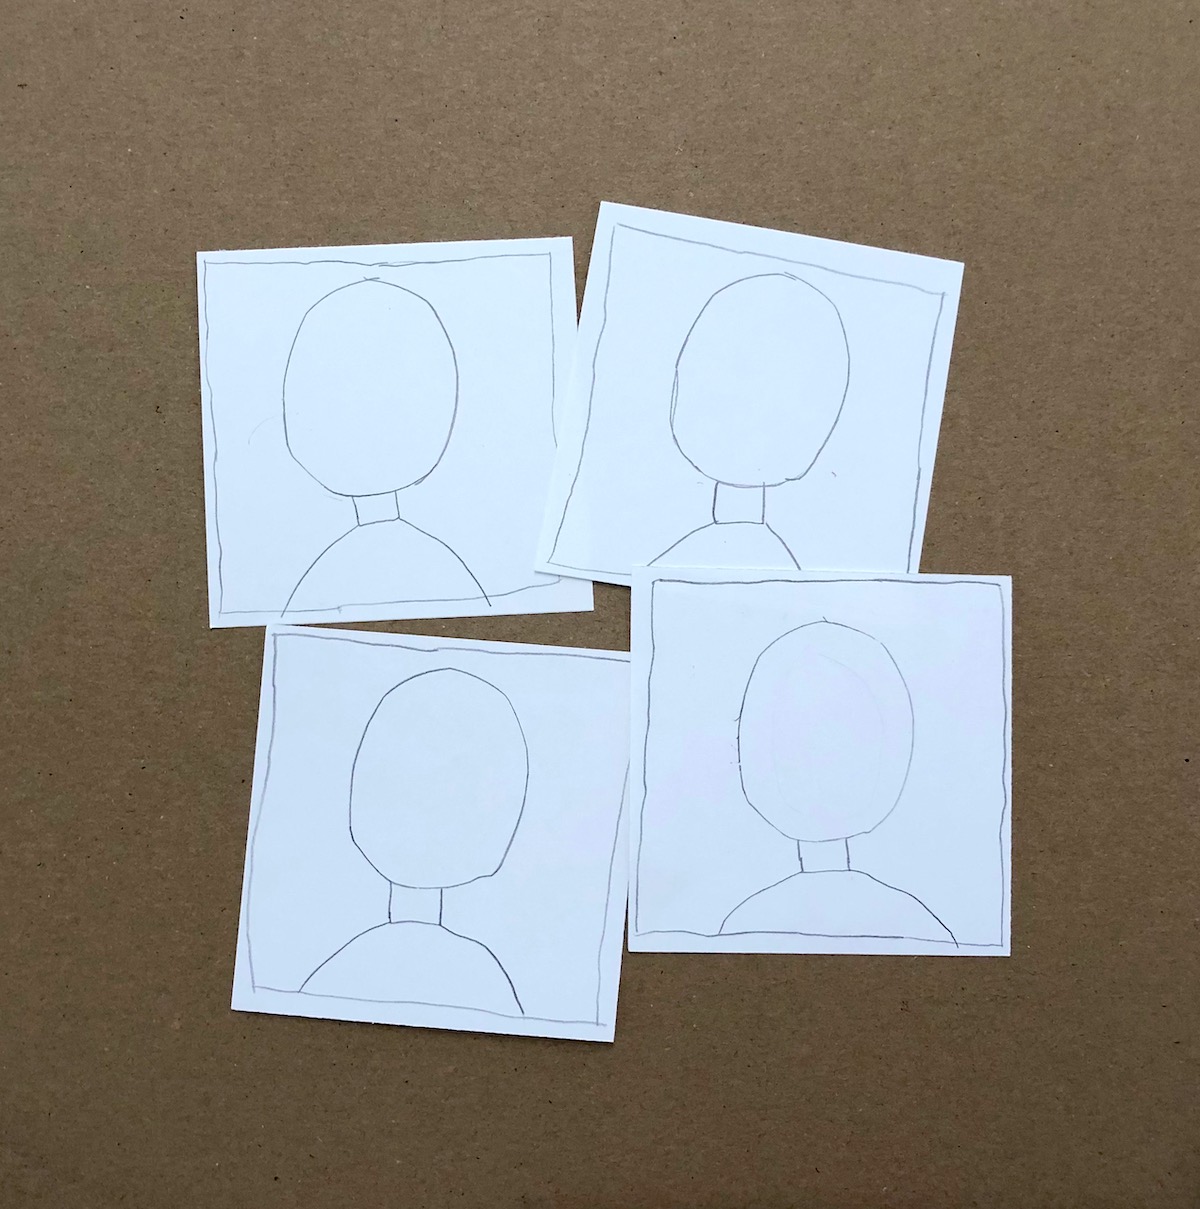 small square portrait drawings